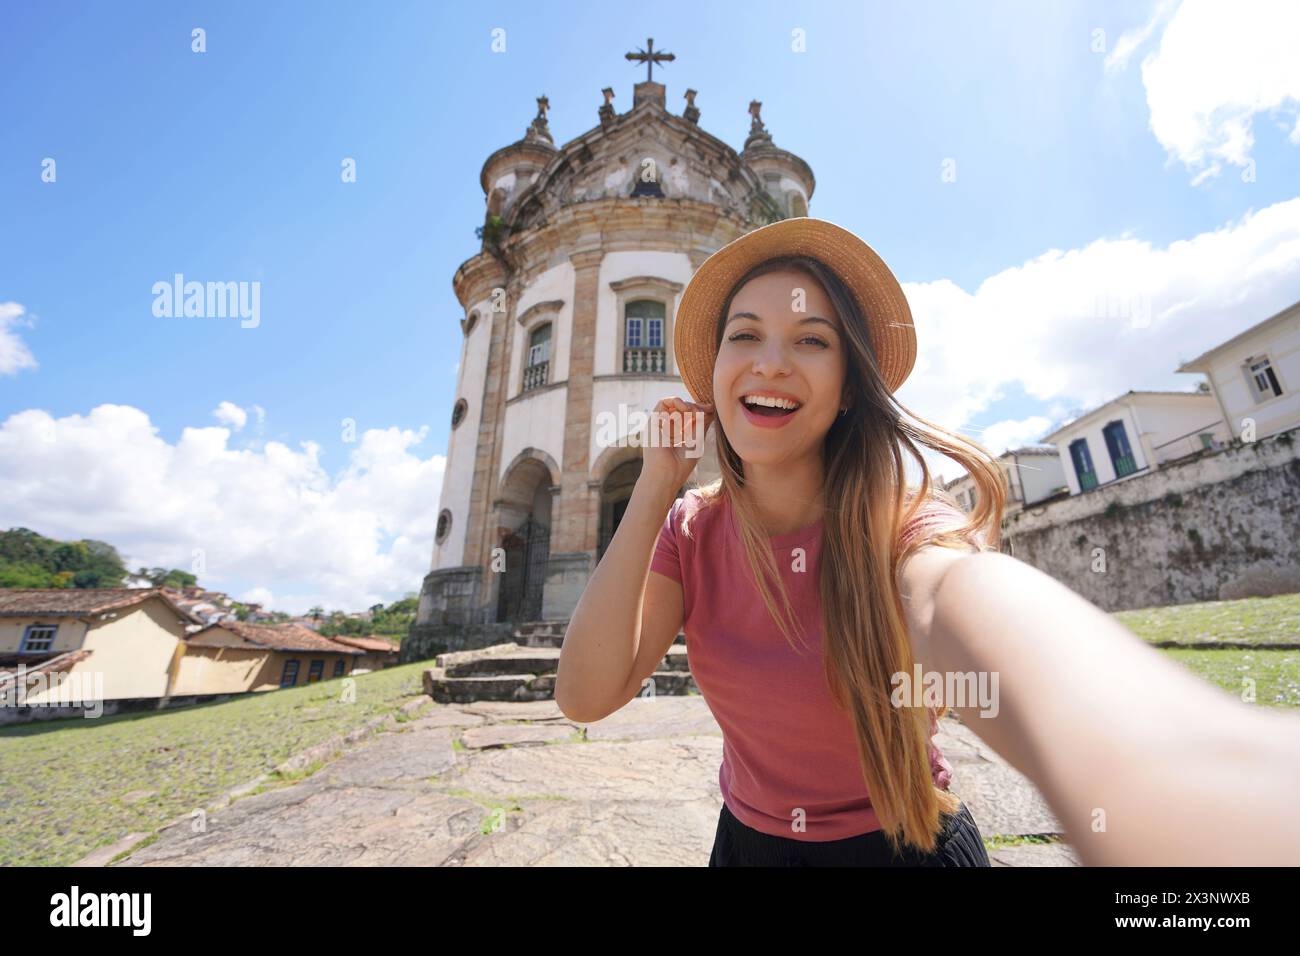 Selfie girl in Ouro Preto, Brazil. Young tourist woman taking self portrait with the church of Our Lady of the Rosary in Ouro Preto touristic destinat Stock Photo